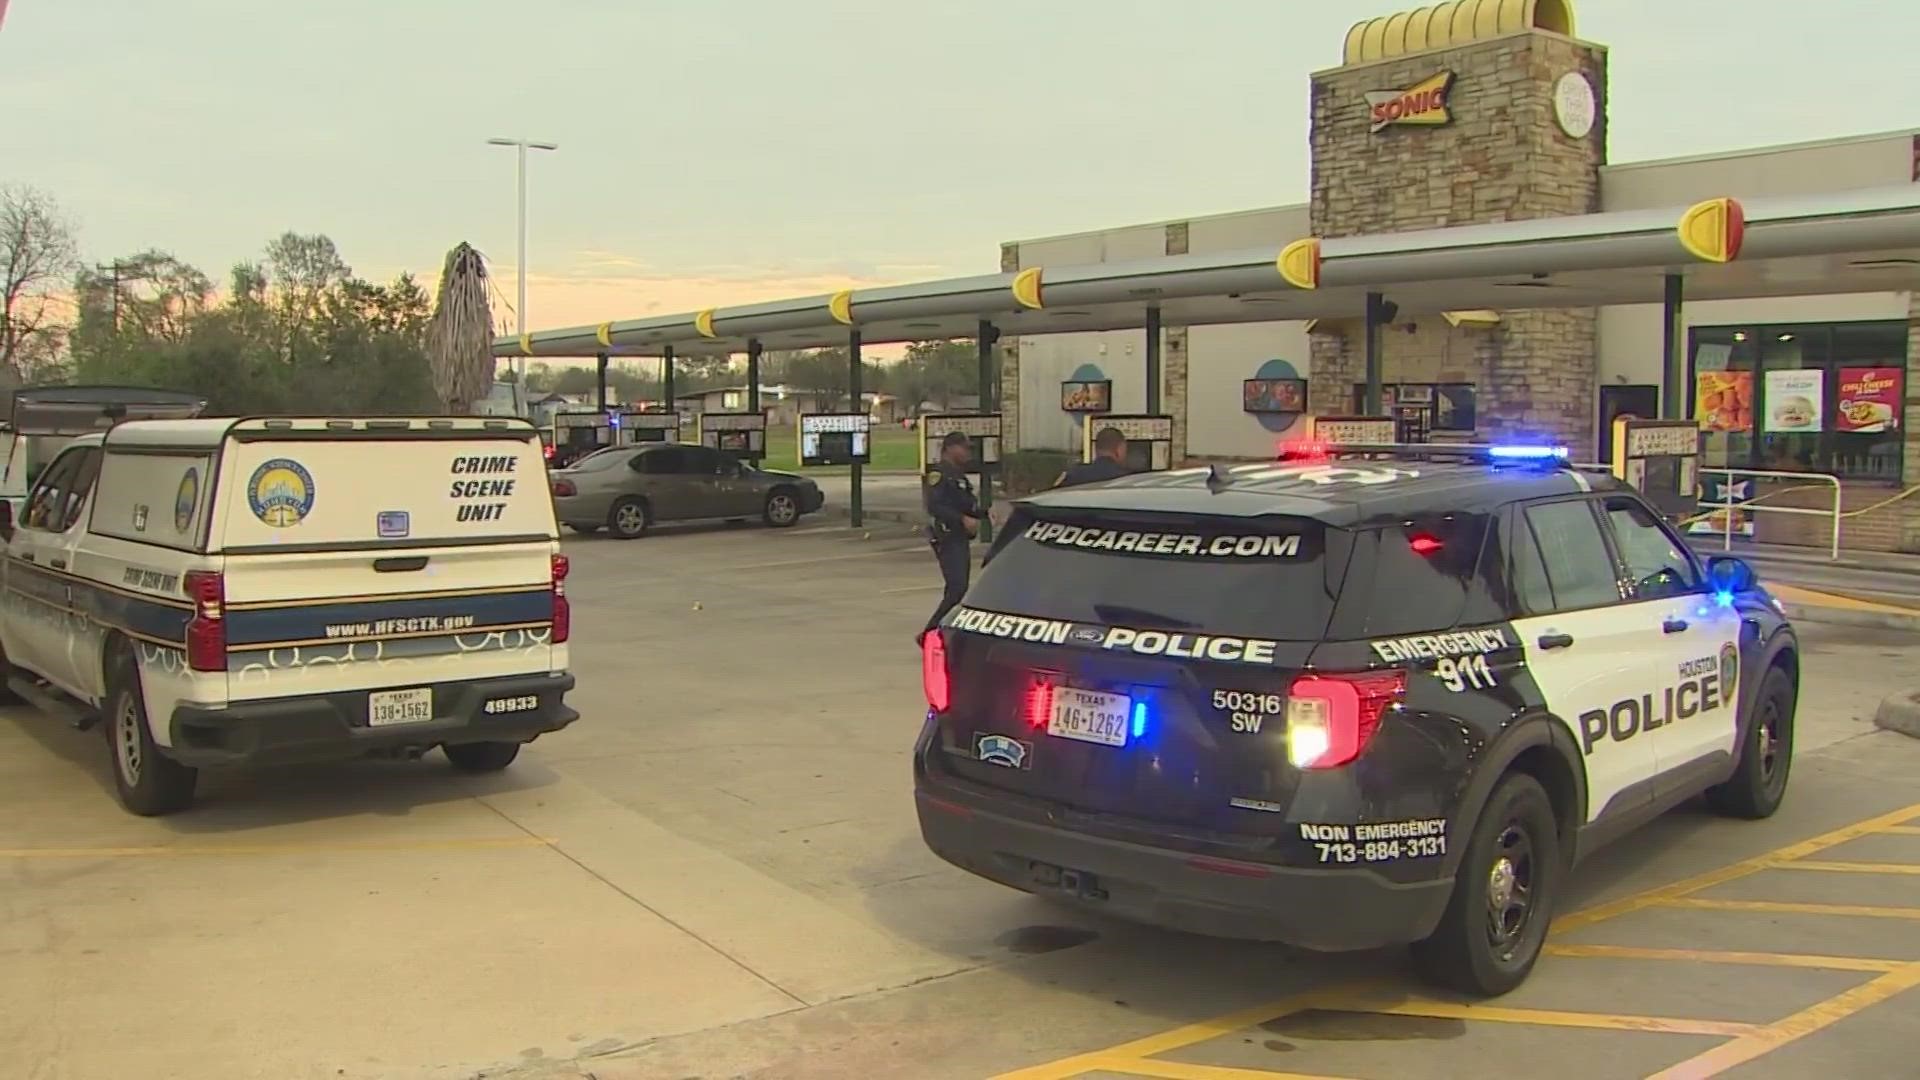 According to HPD officials, one person was killed near the Sonic on South Post Oak near West Orem.